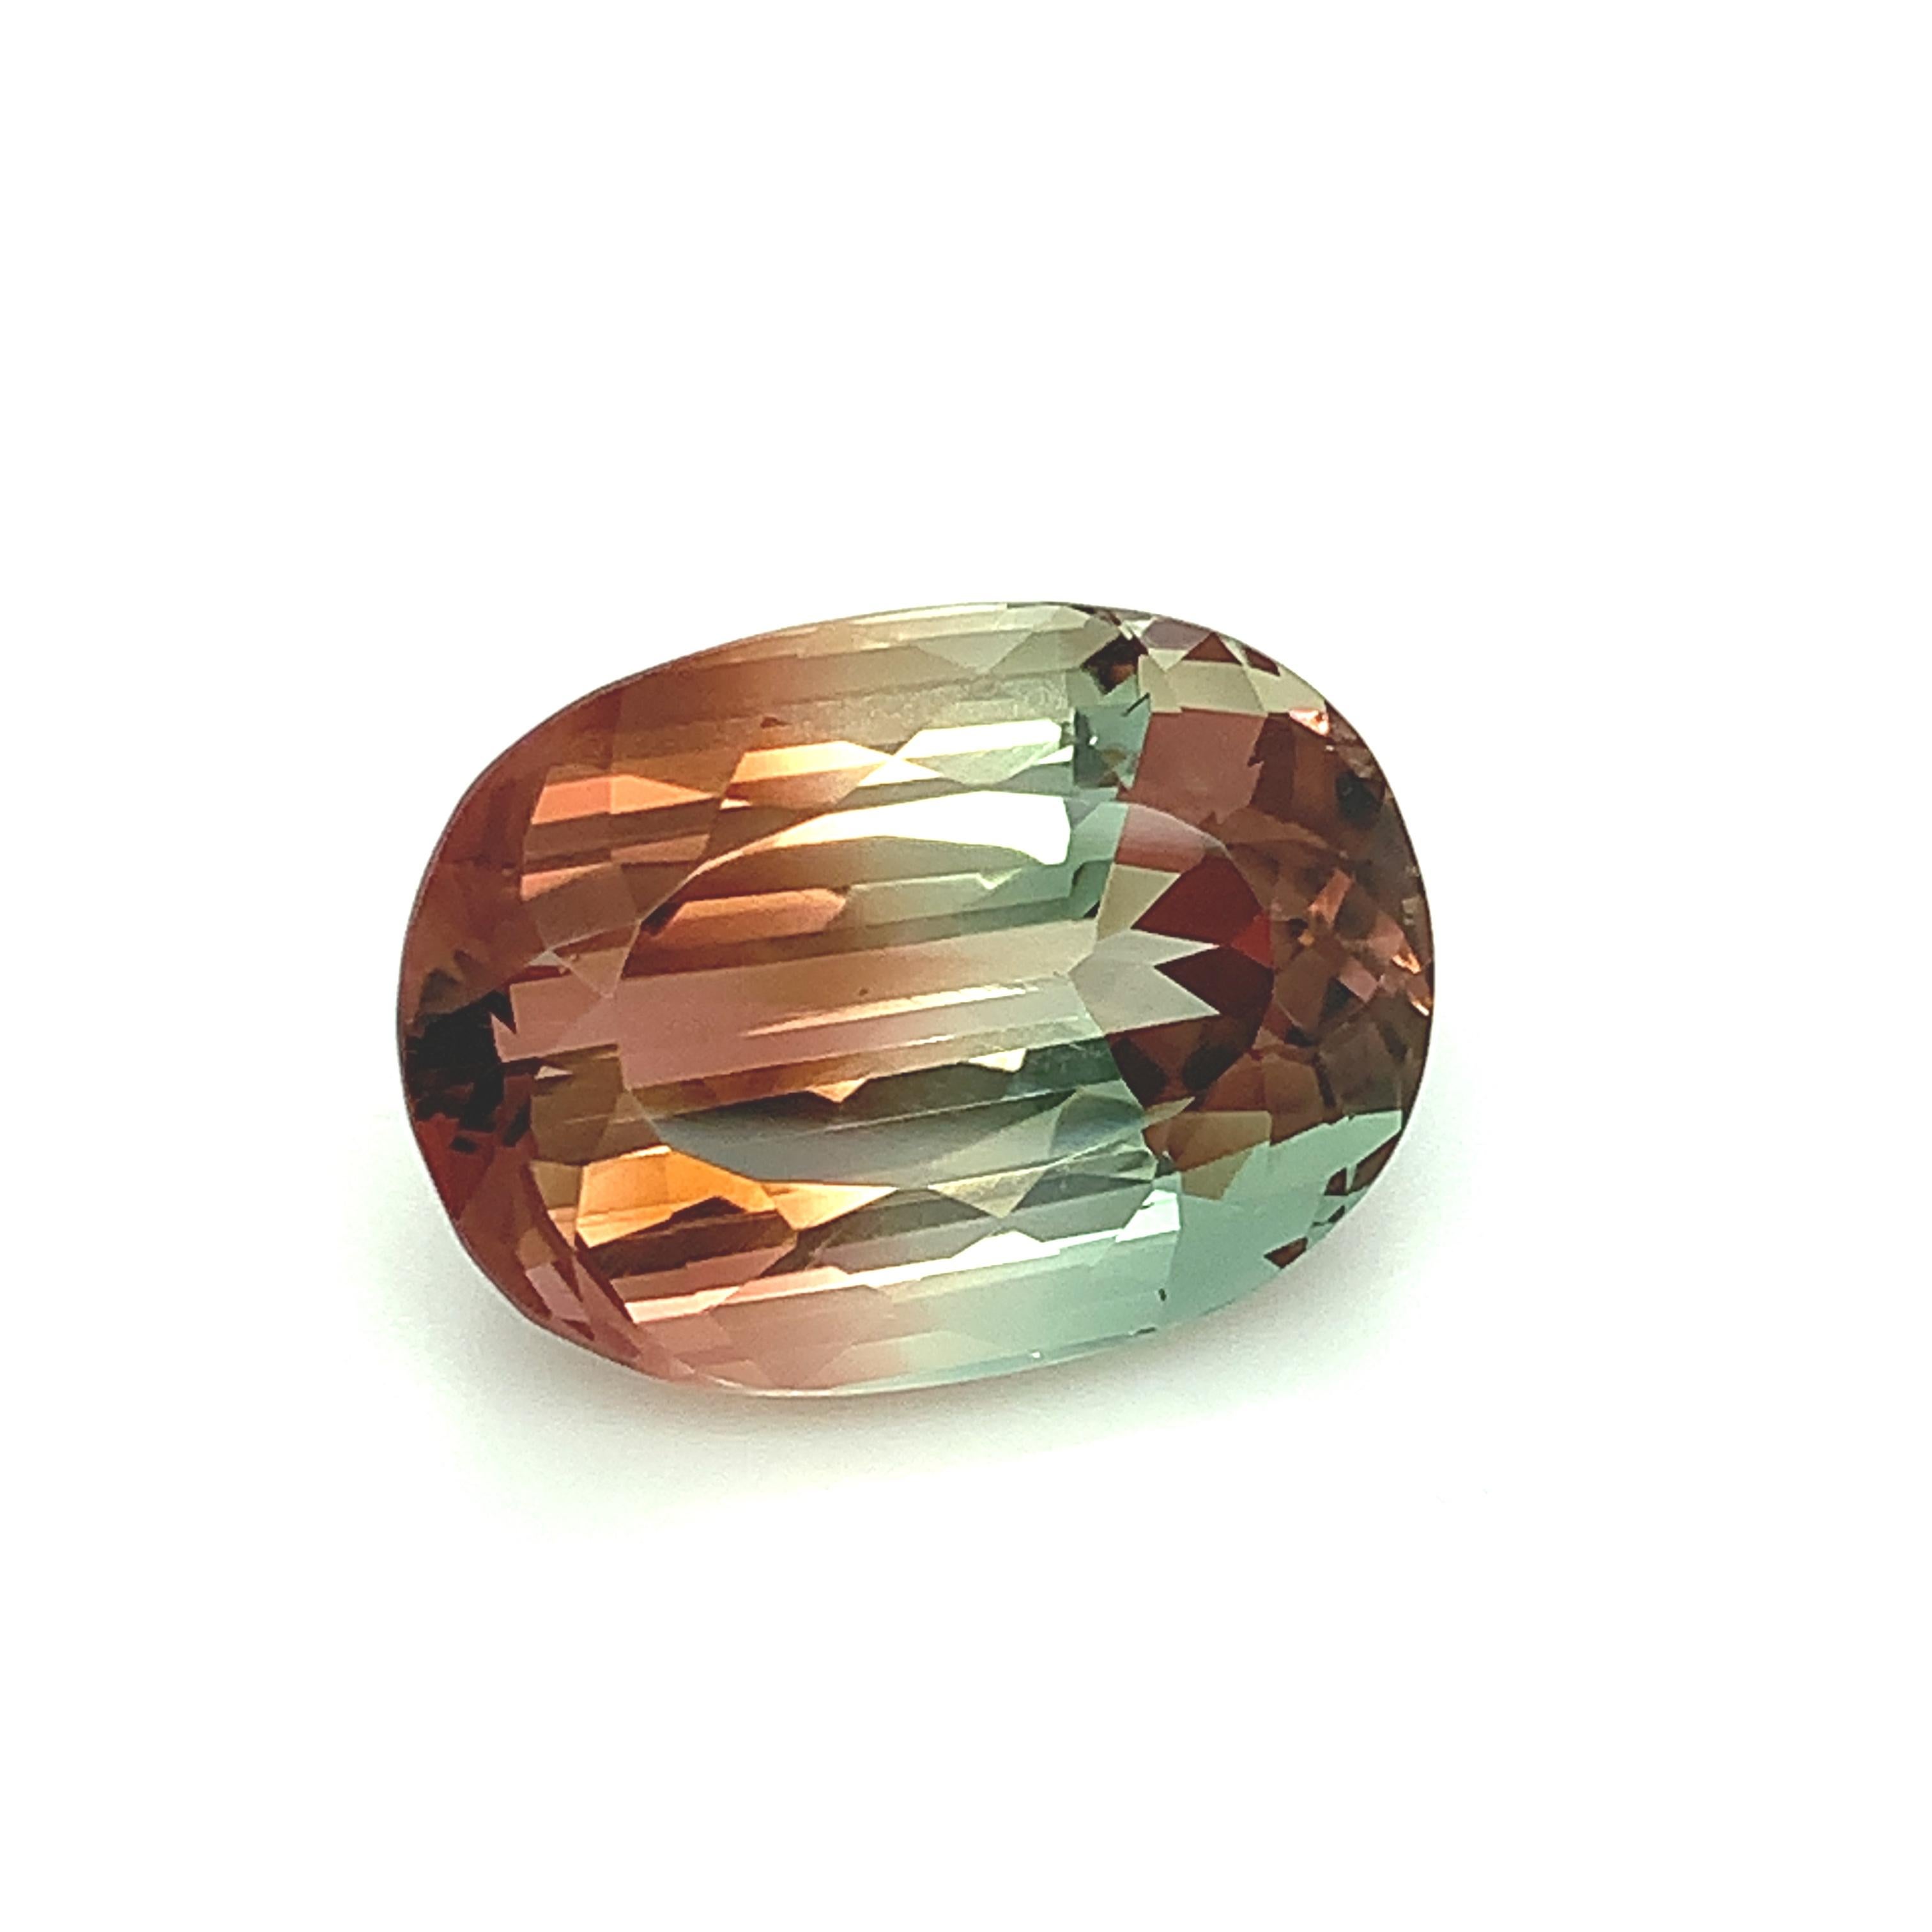 This exceptionally clean and brilliant oval facetted bi-colored tourmaline actually displays more than two gorgeous colors! It begins with a strong peachy pink on one end, gradually becoming more of a pure peach hue before transitioning toward